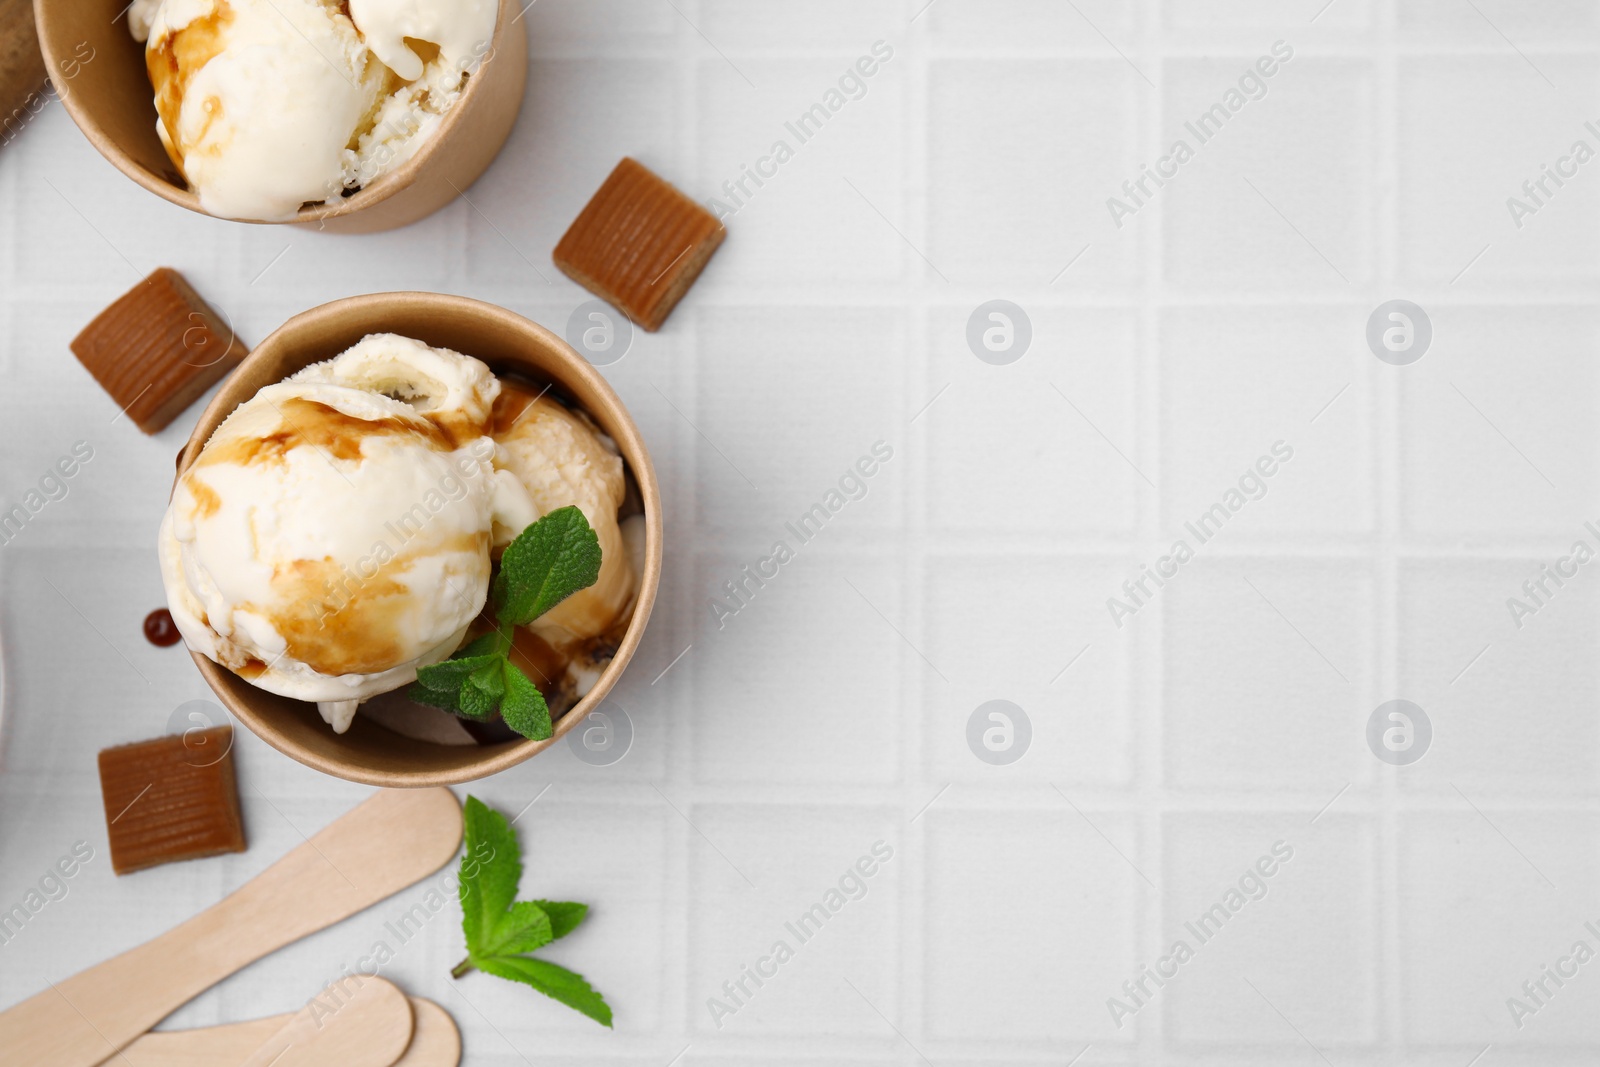 Photo of Scoops of ice cream with caramel sauce, mint leaves and candies on white tiled table, flat lay. Space for text